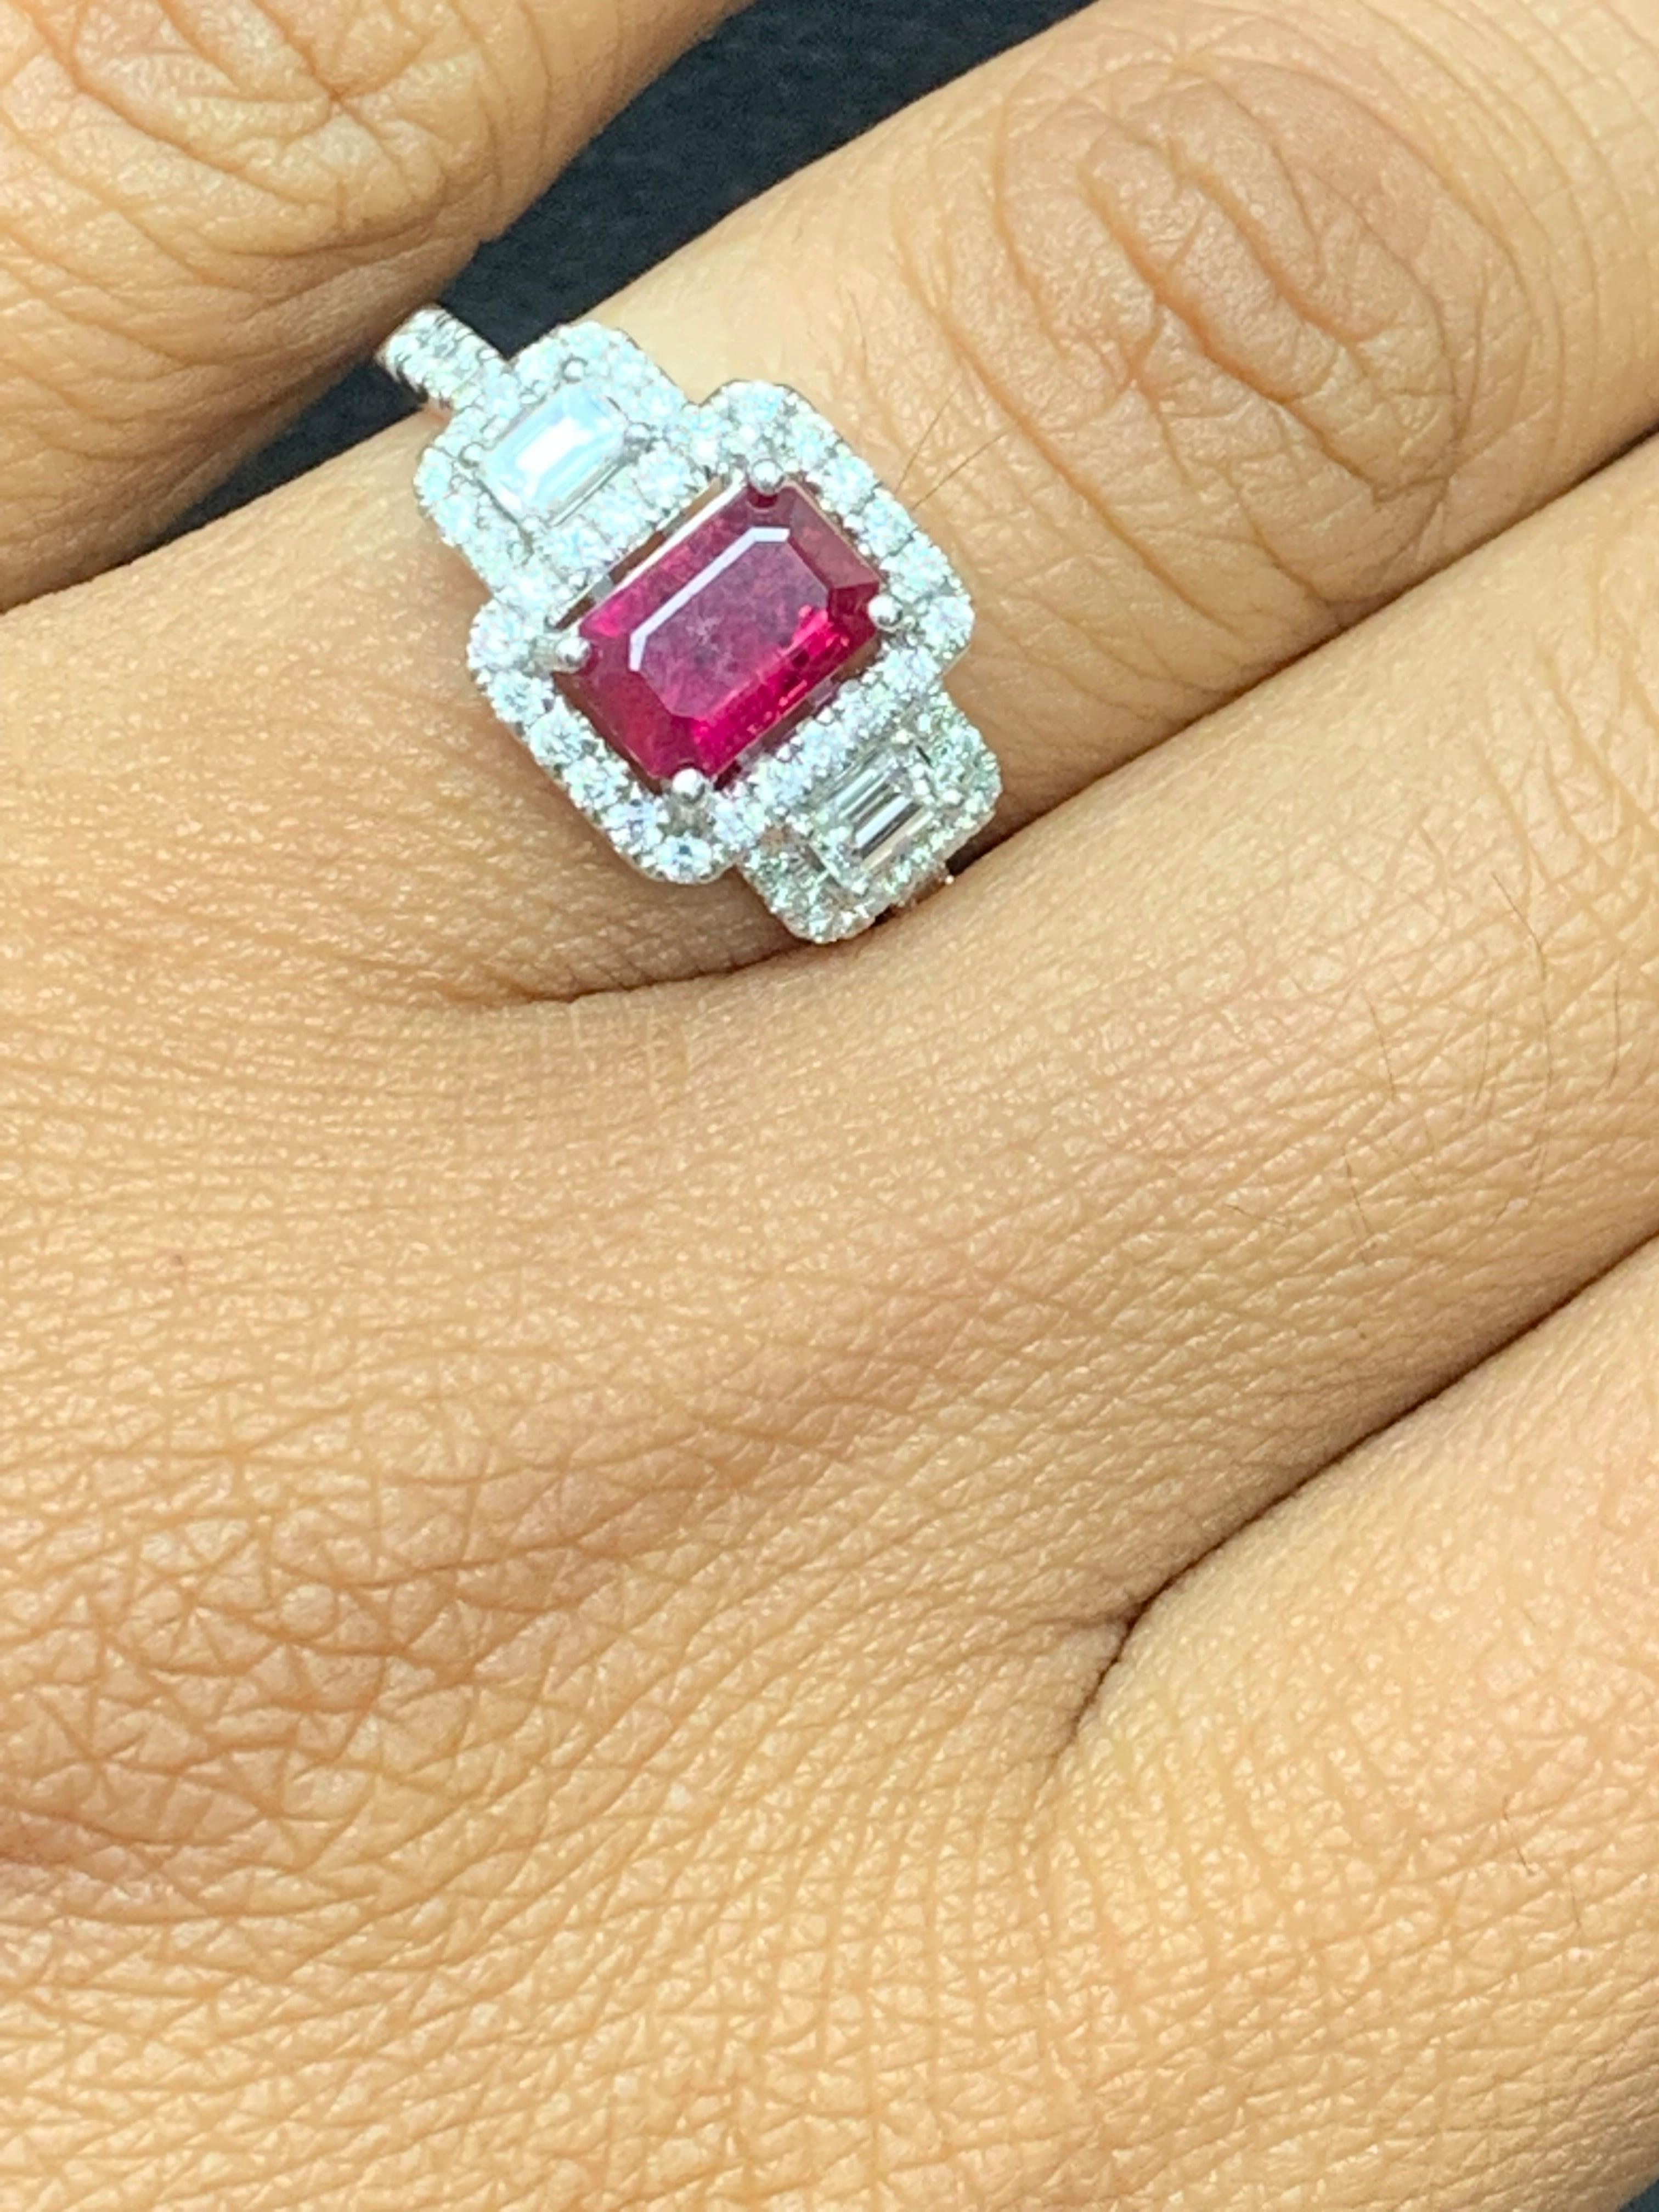 0.85 Carat Emerald Cut Ruby Diamond Engagement Ring in 18K White Gold For Sale 7